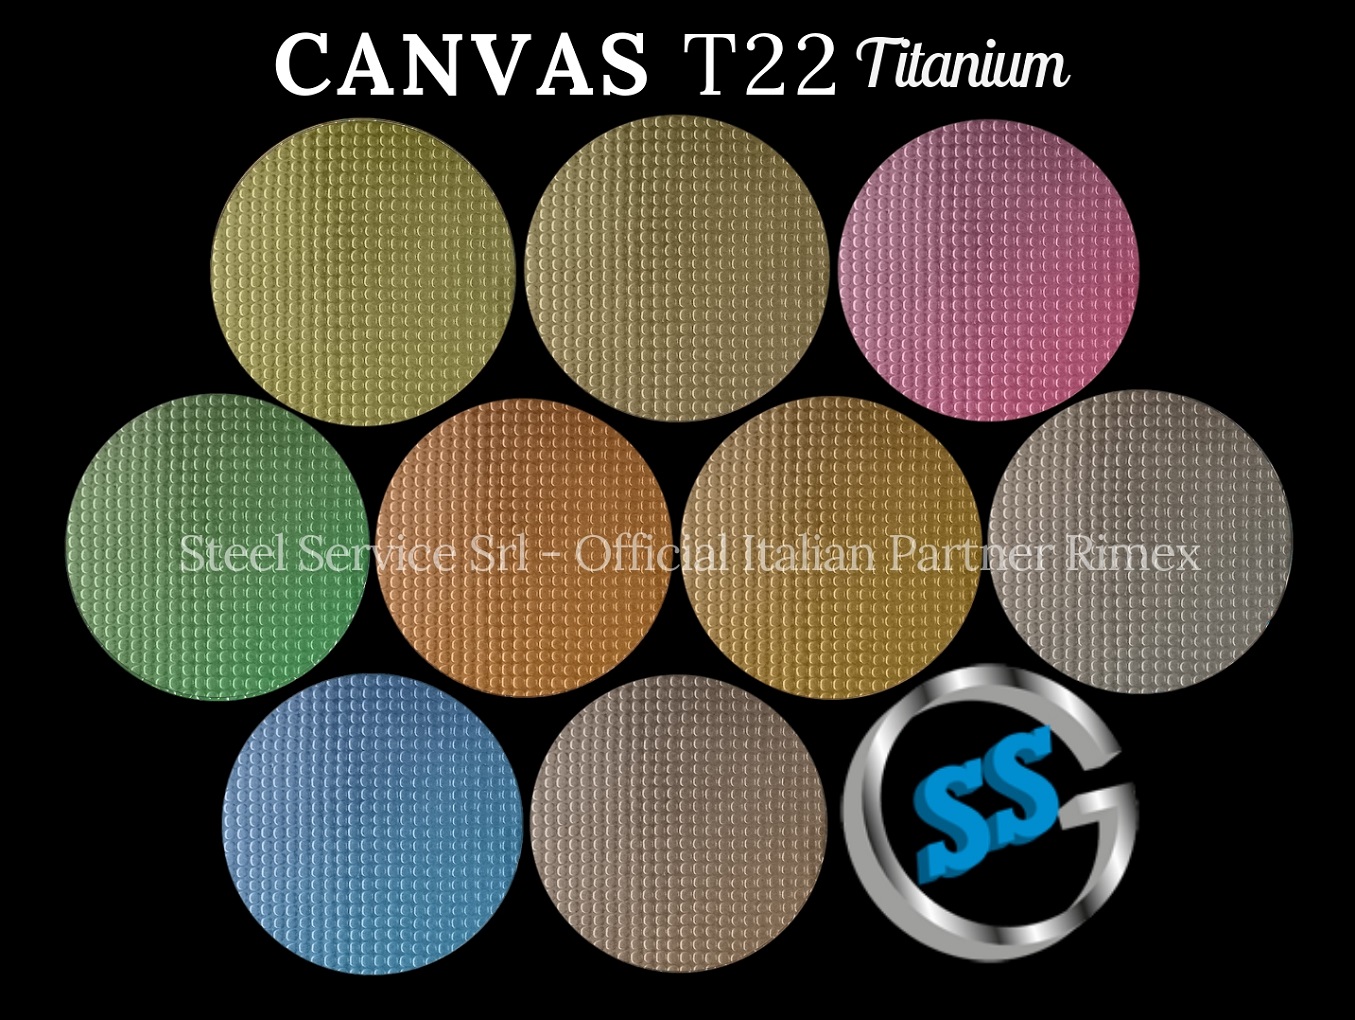 CANVAS T22 gallery 4